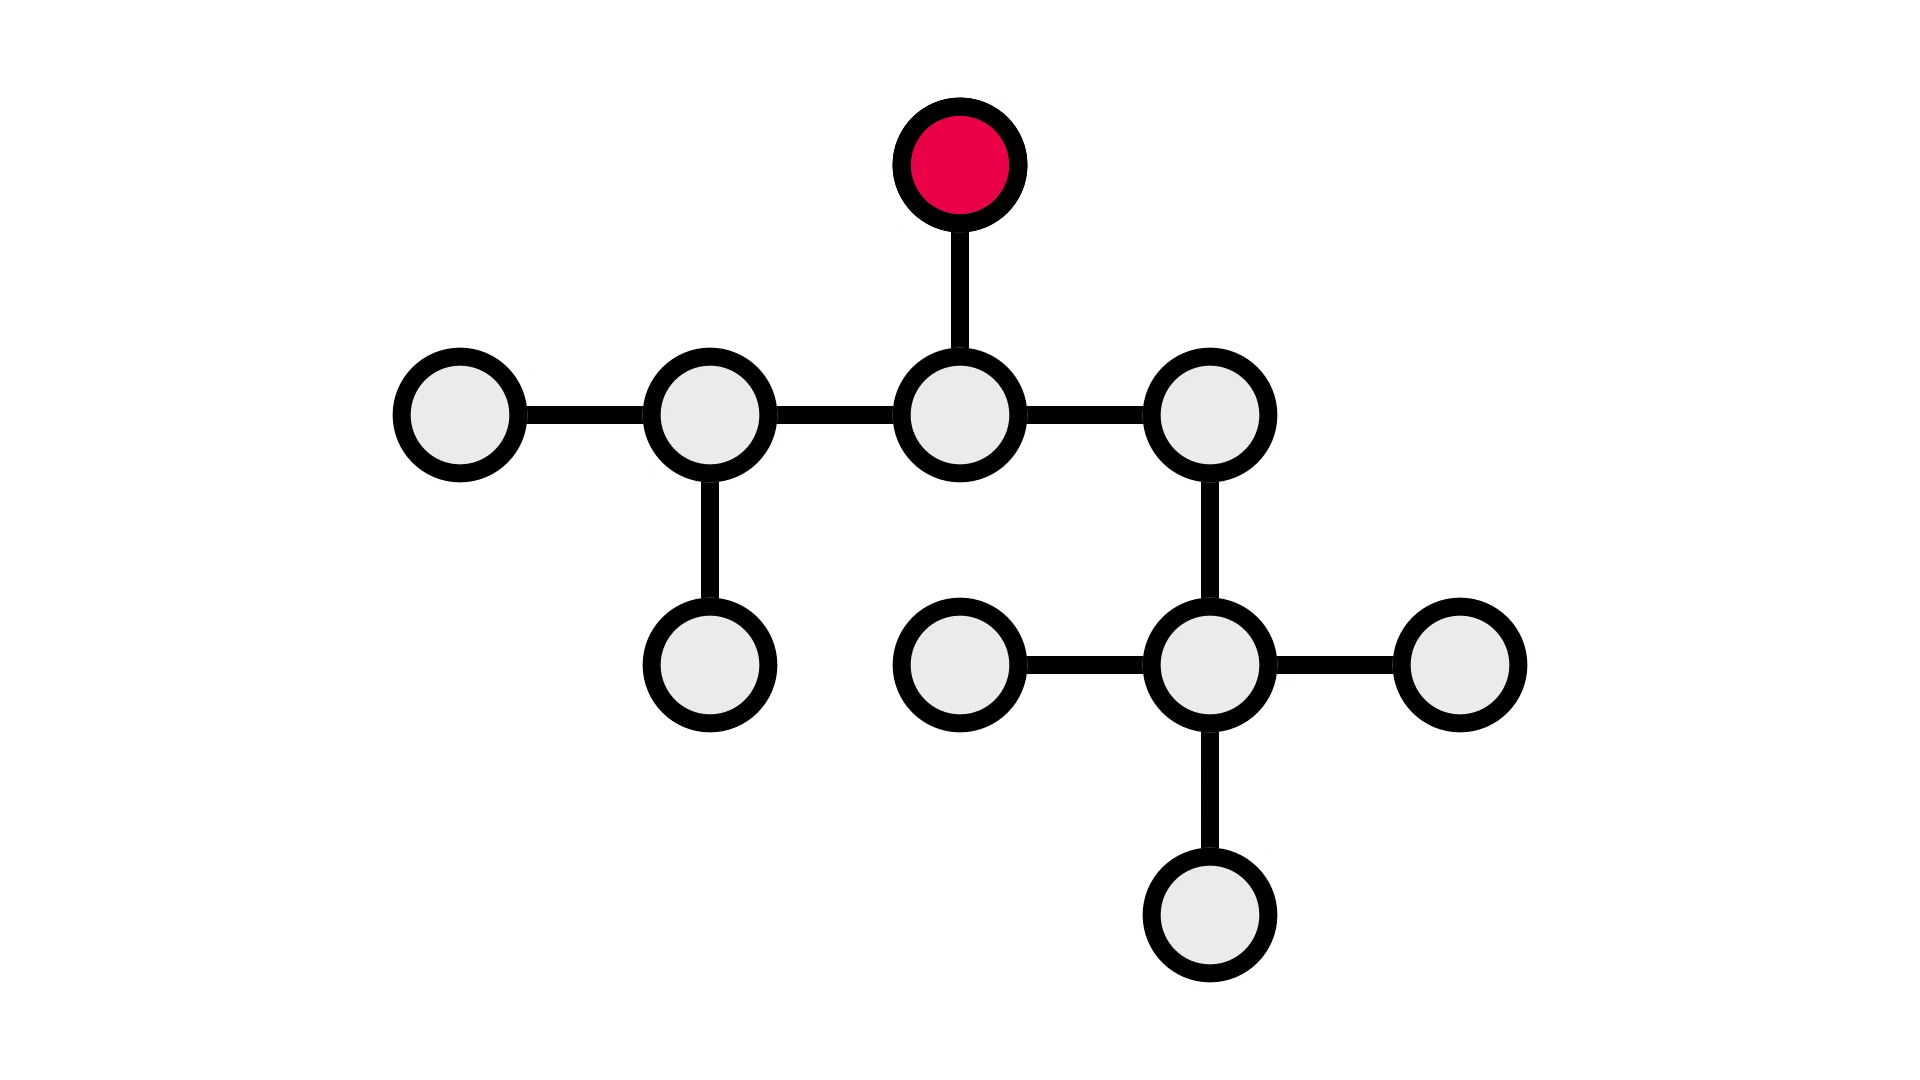 stylized hierarchical org chart with all nodes being white while the top one is red